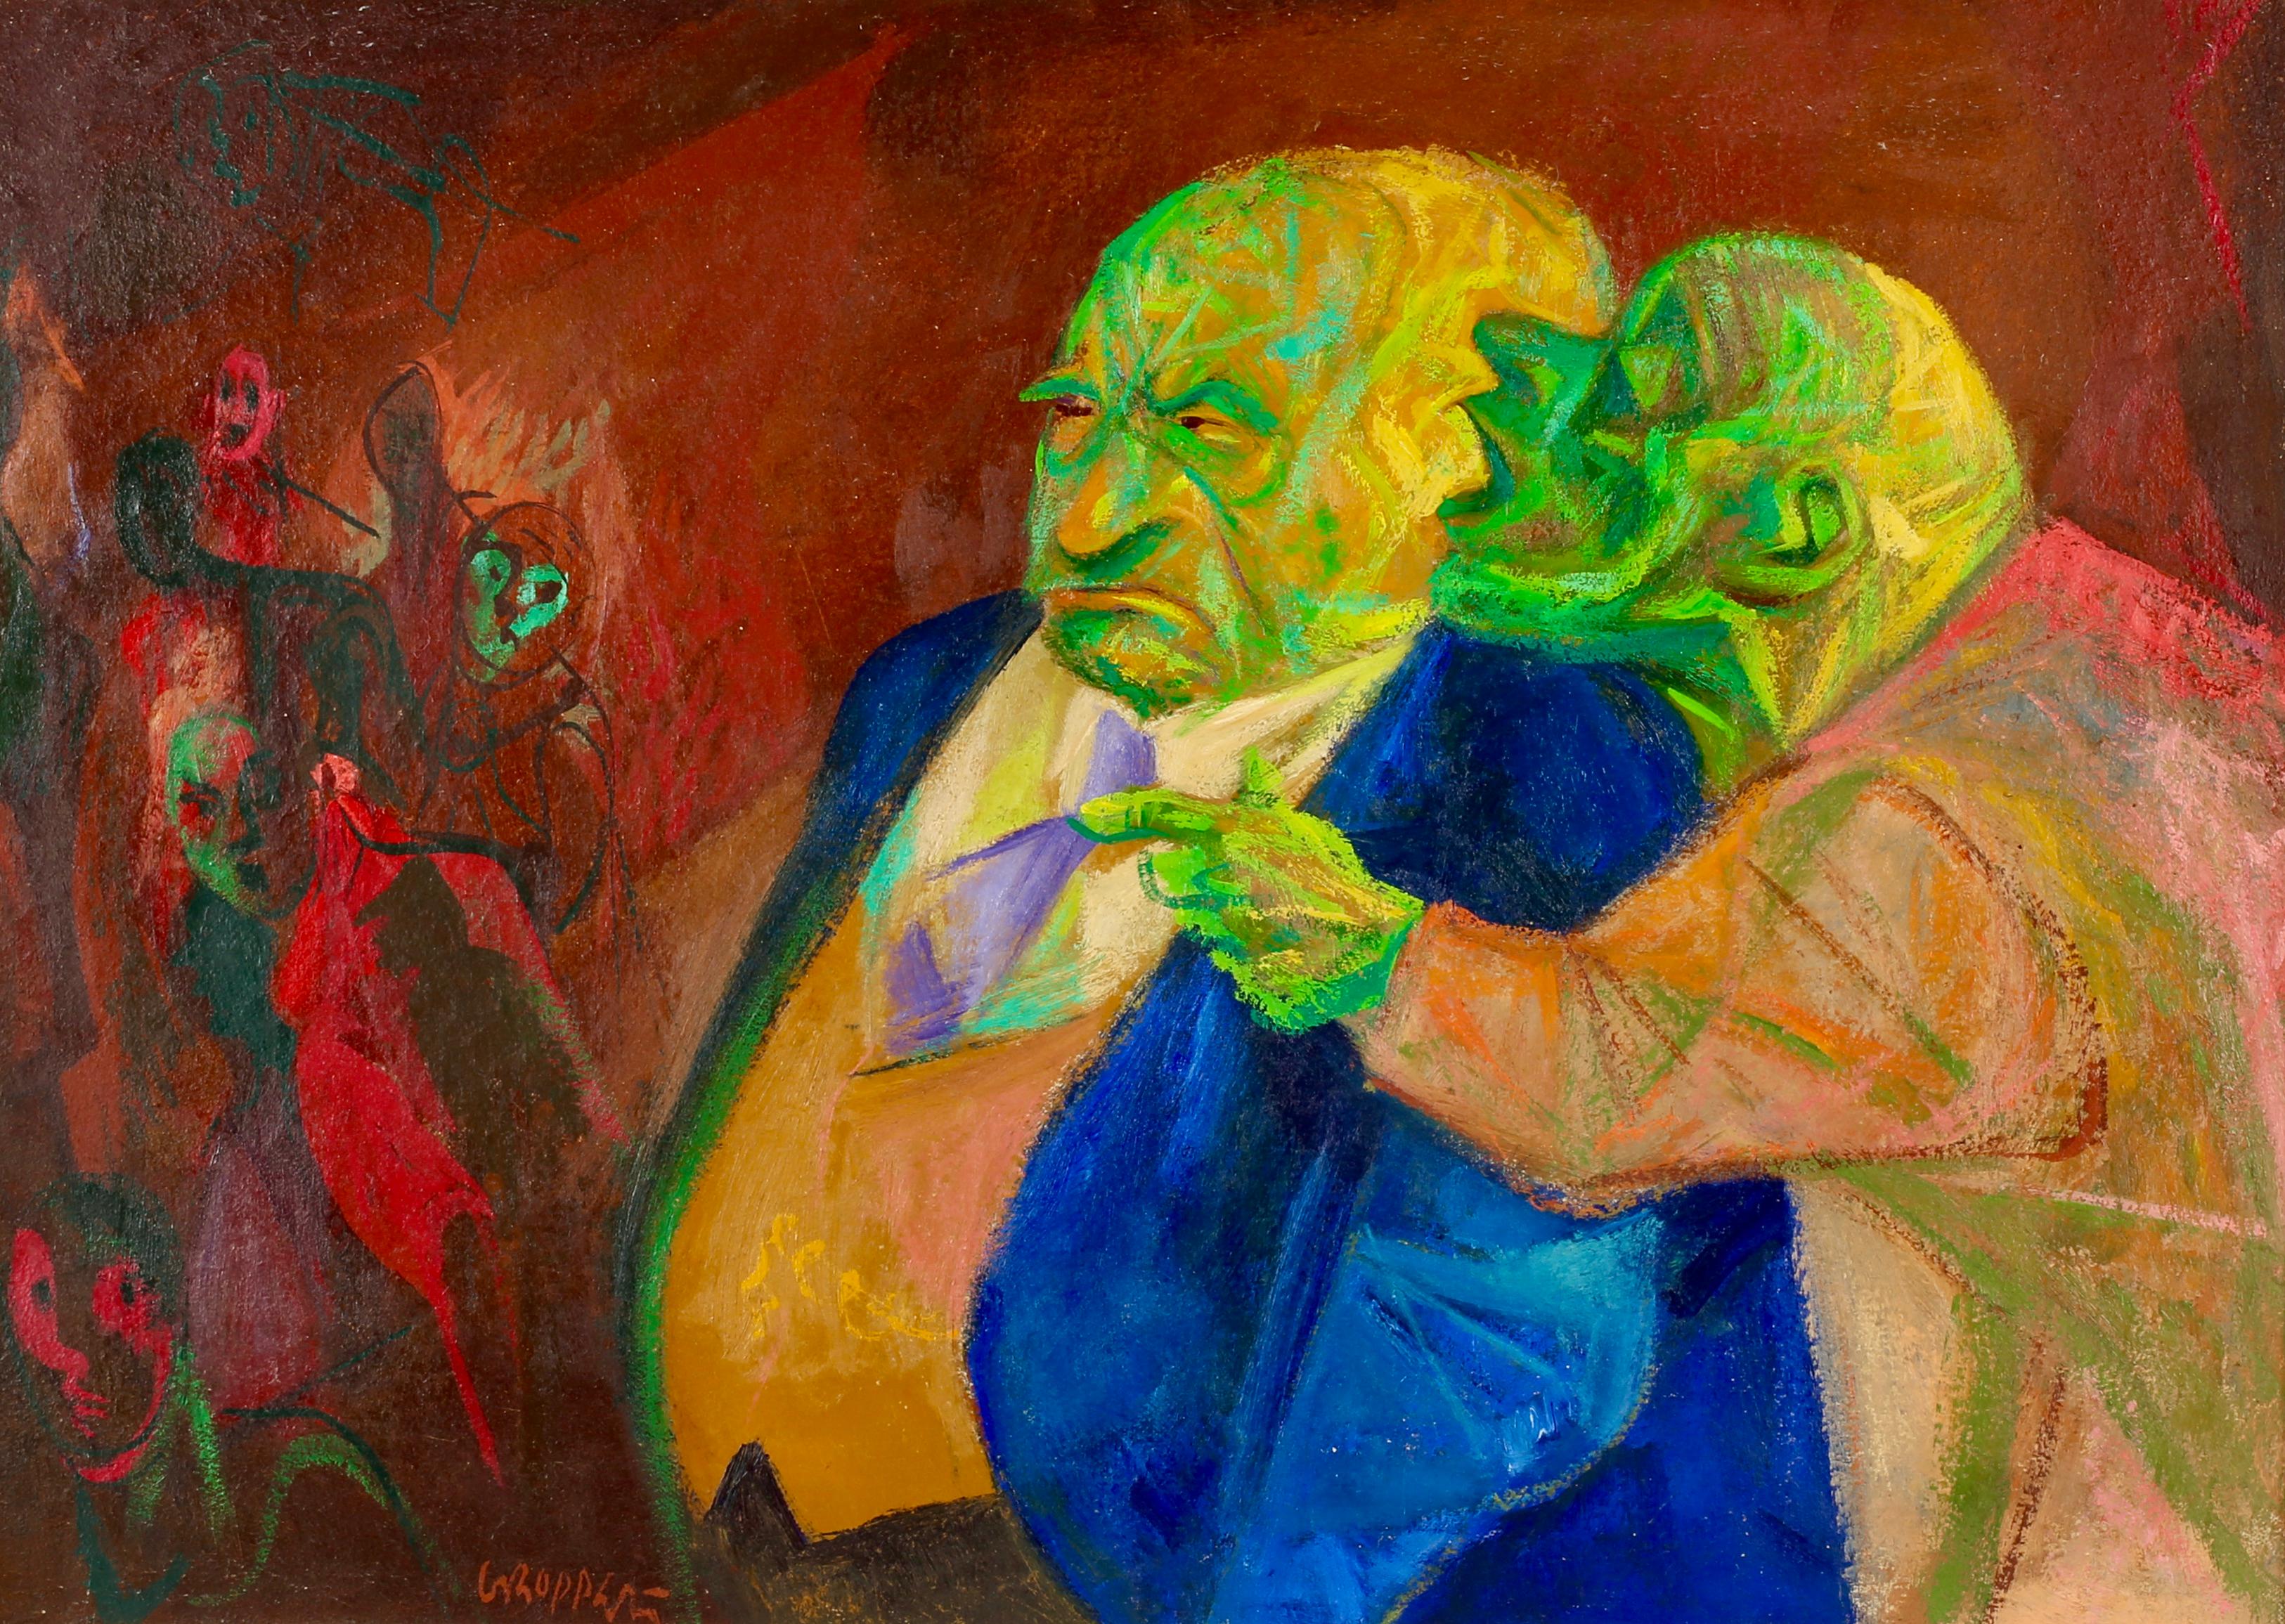 William Gropper Interior Painting - "The Informer" Mid 20th Century Social Realism Modern Political Senator Colorful